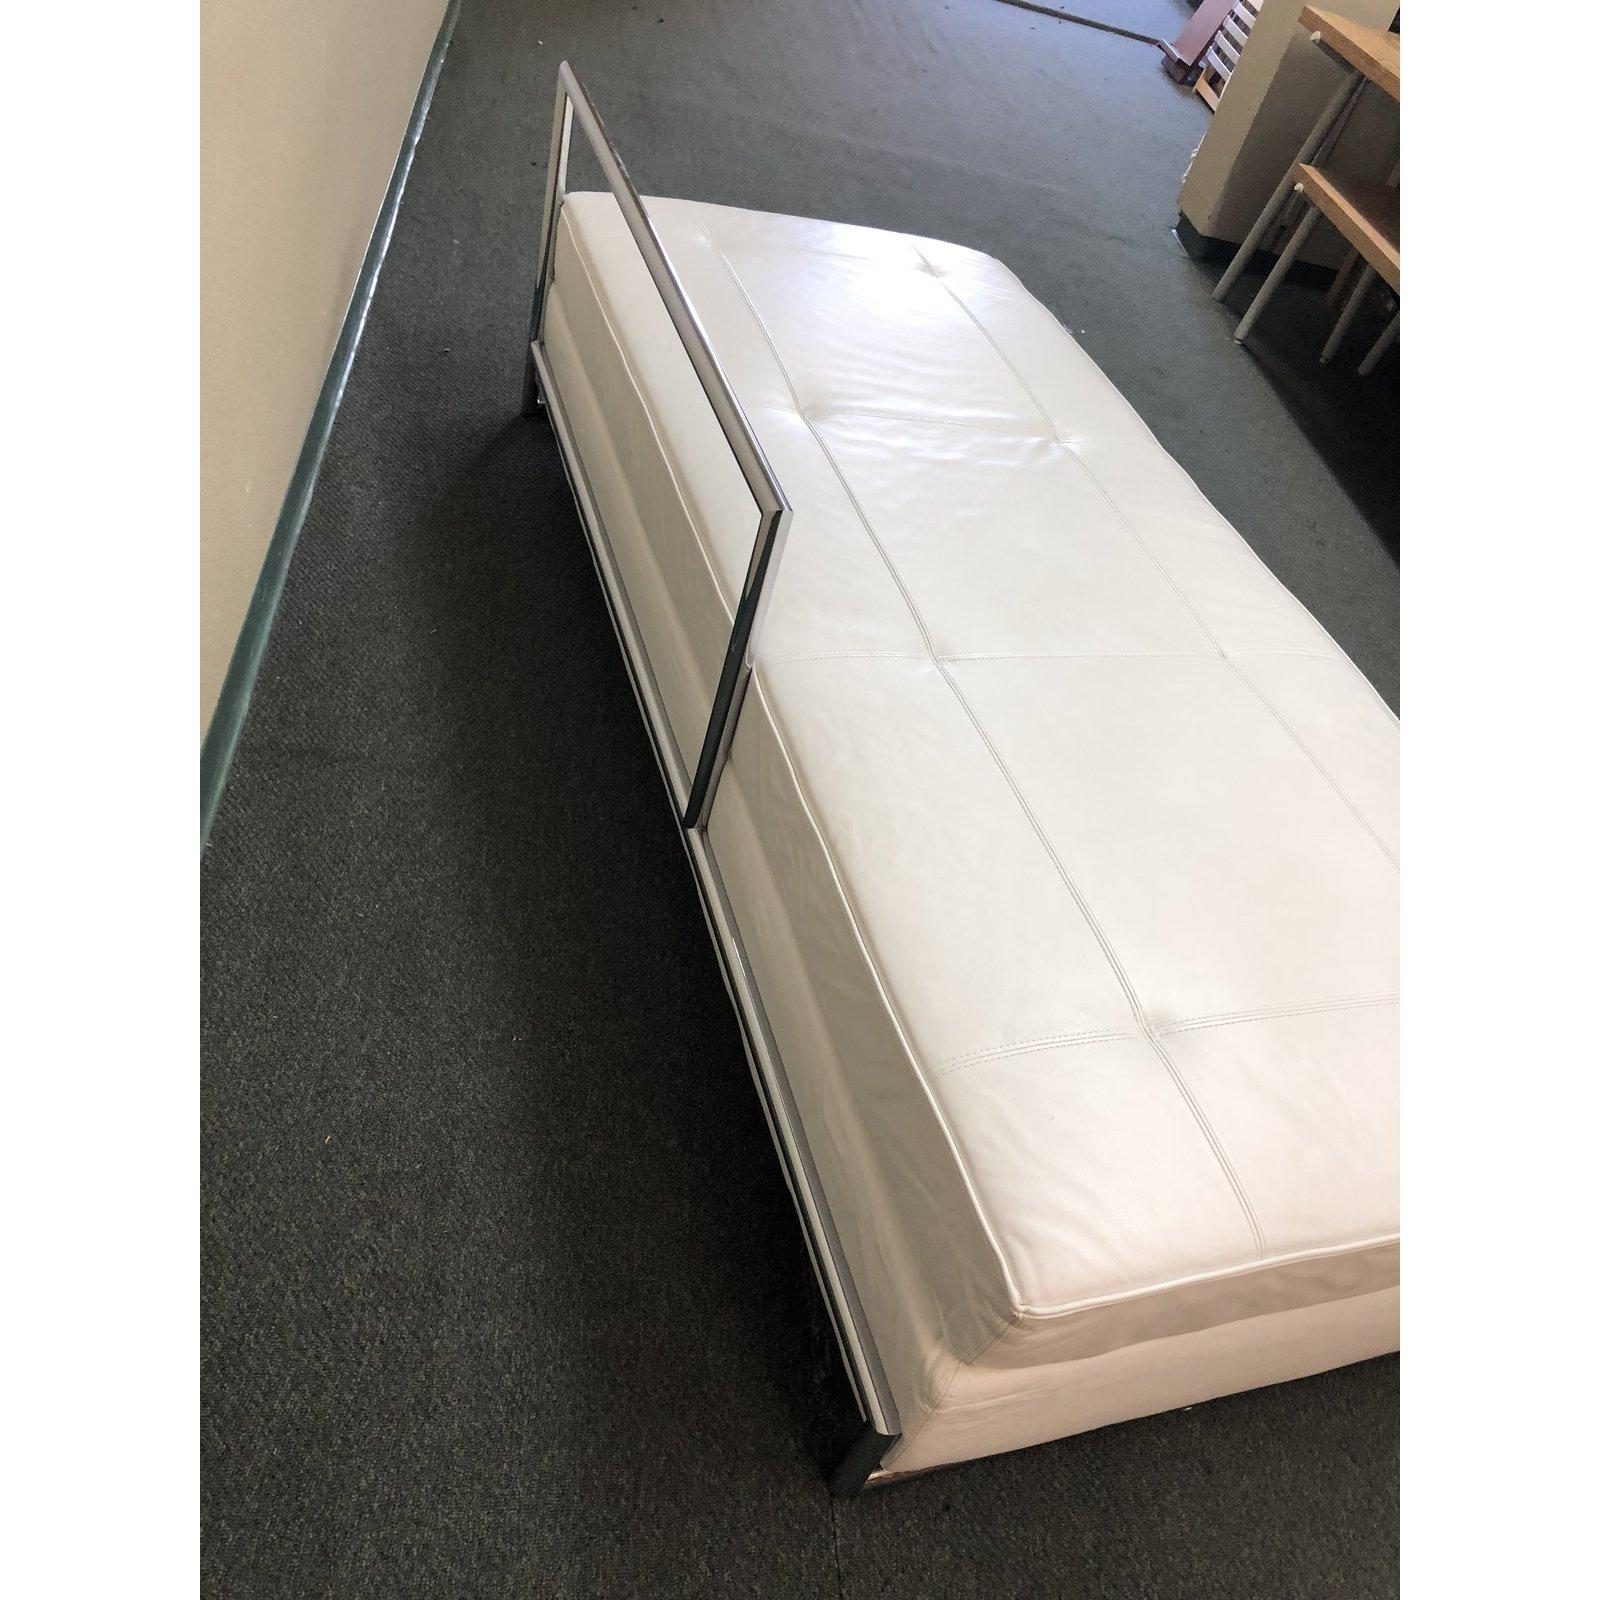 An Eileen Gray daybed. This beautiful piece is upholstered in white leather and the base is chromium plated steel tubing. Eileen Gray designed the daybed in 1925 and since then it is counted among the most famous products by her. Daybed is made by